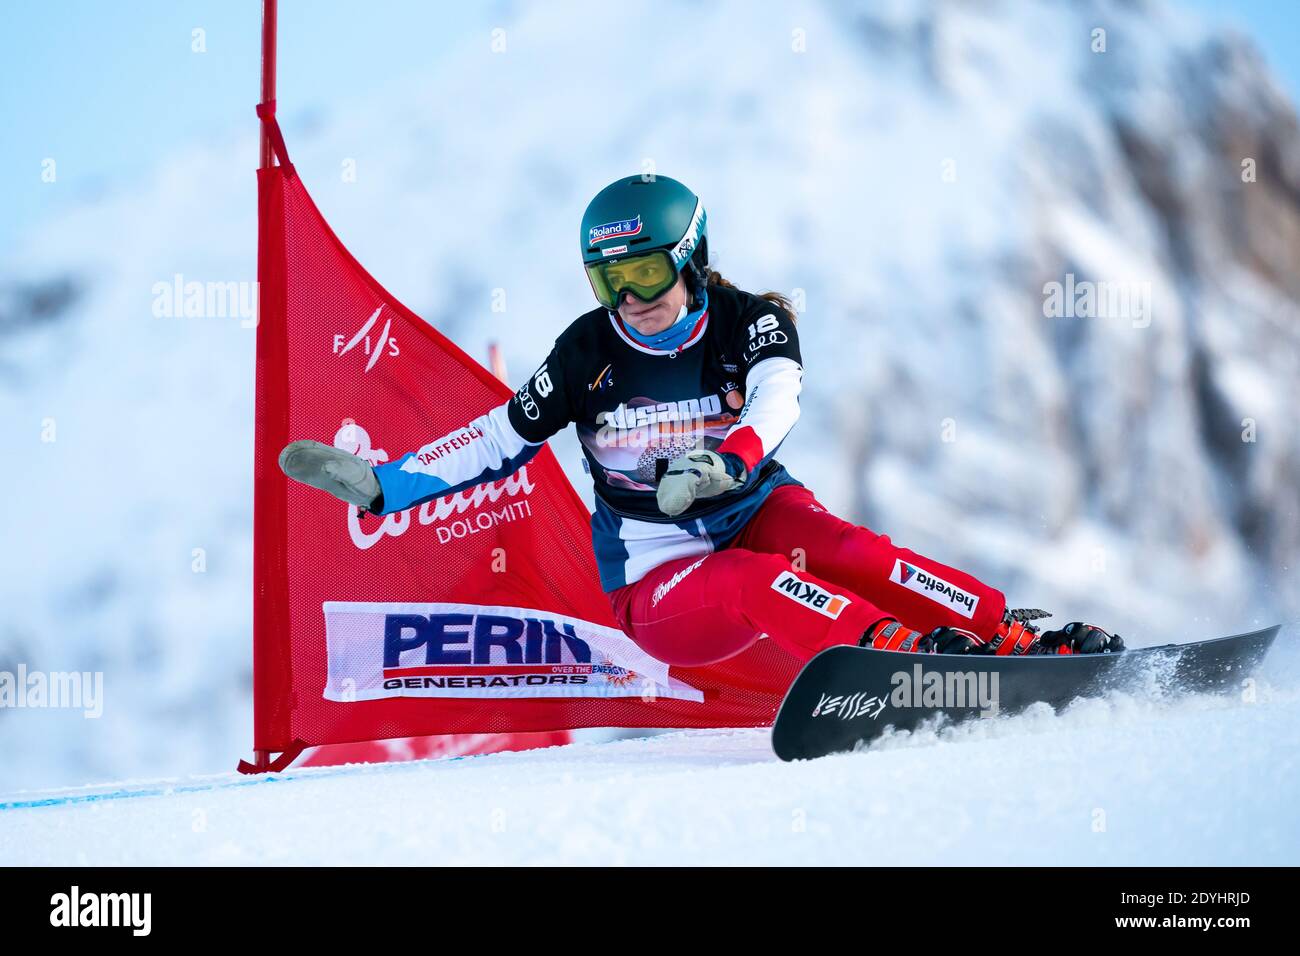 Cortina d'Ampezzo, Italy, 12 Dec 2020. KUMMER Patrizia Theresia of Switzerland competing in the Fis Snowboard World Cup 2021  Women's Parallel Giant S Stock Photo